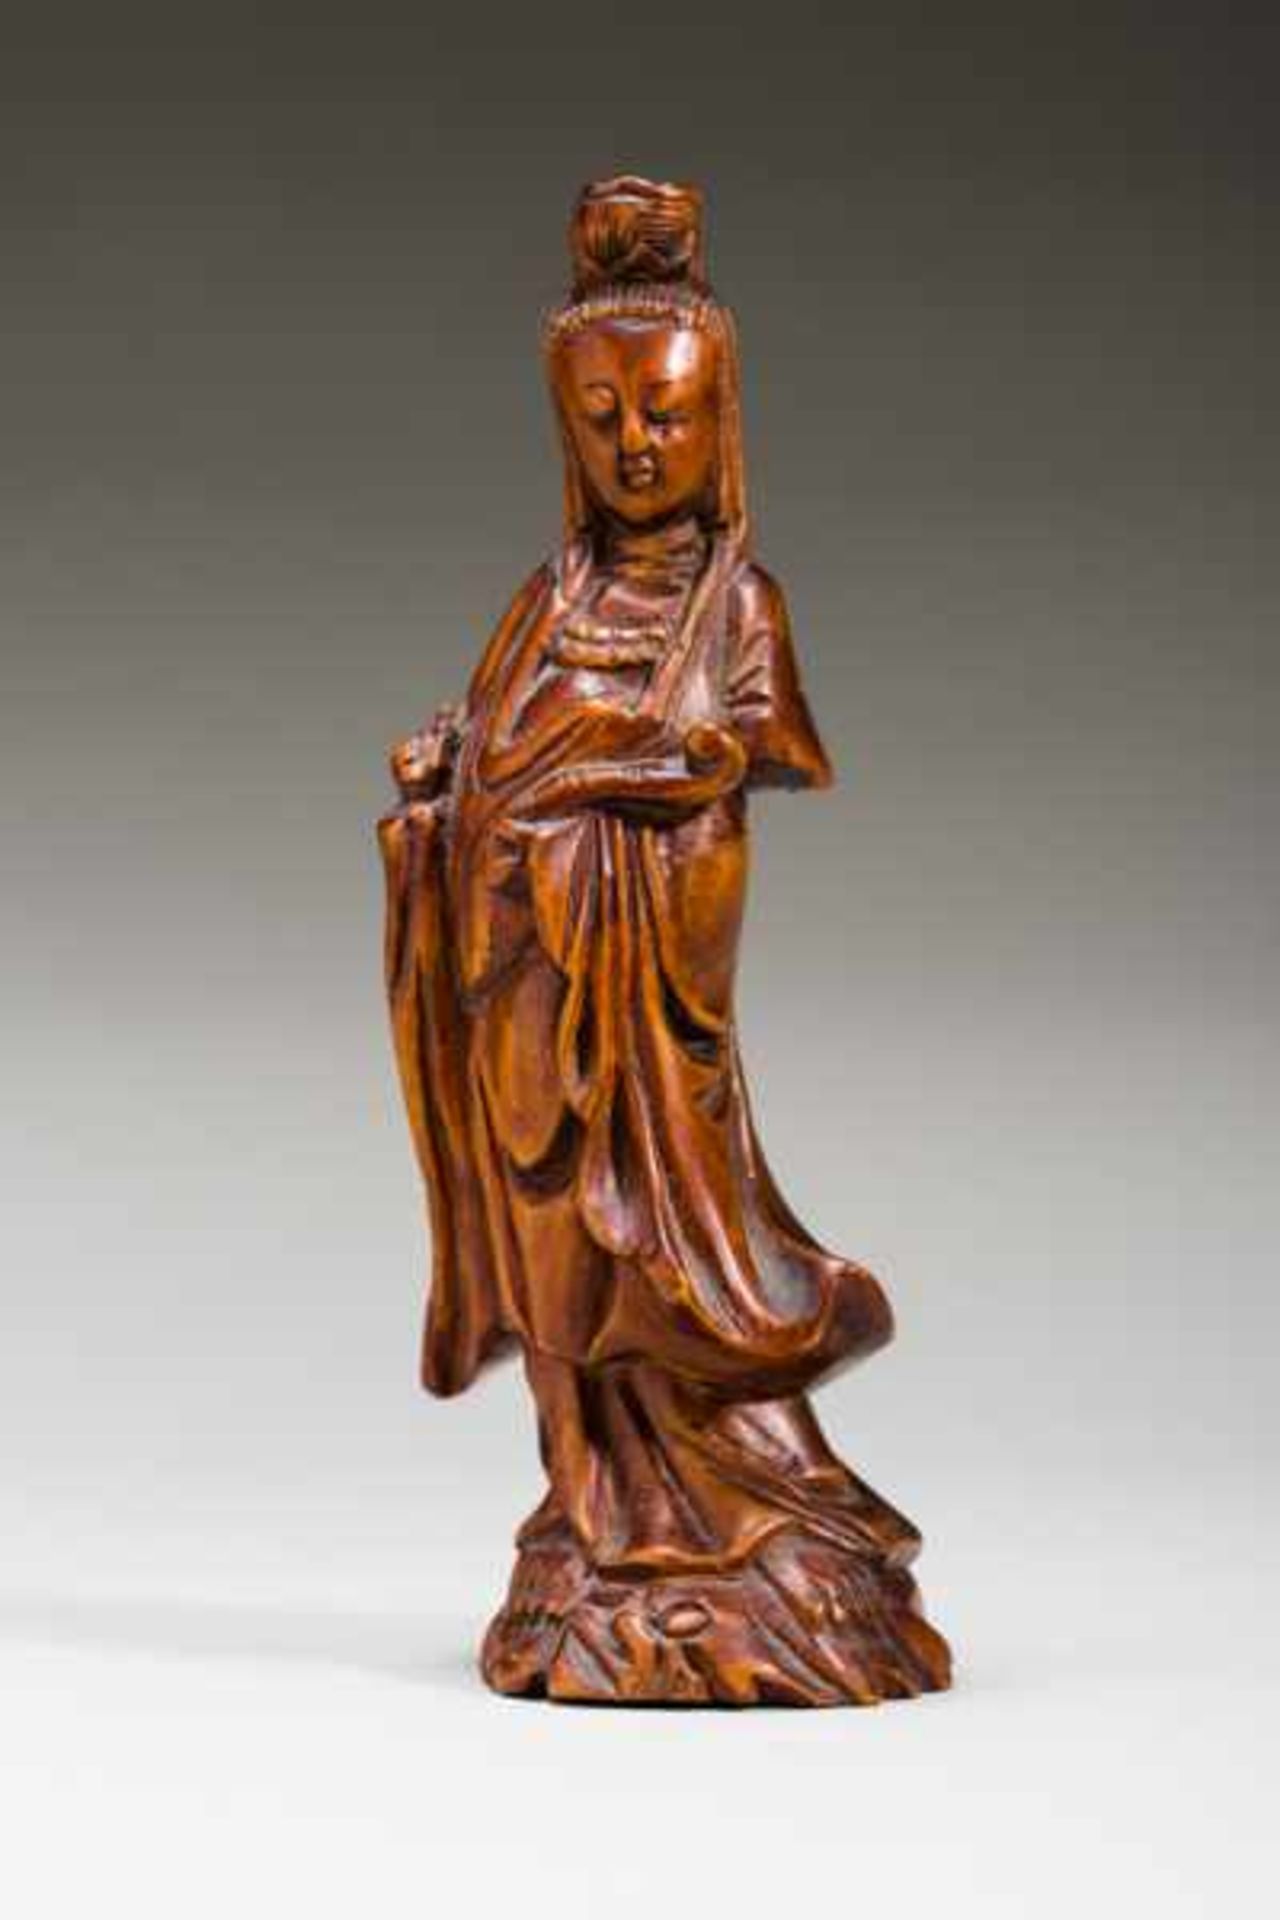 GUANYING WITH SCEPTER Wood. China, Qing dynasty (1644-1911)Small figure of the popular goddess